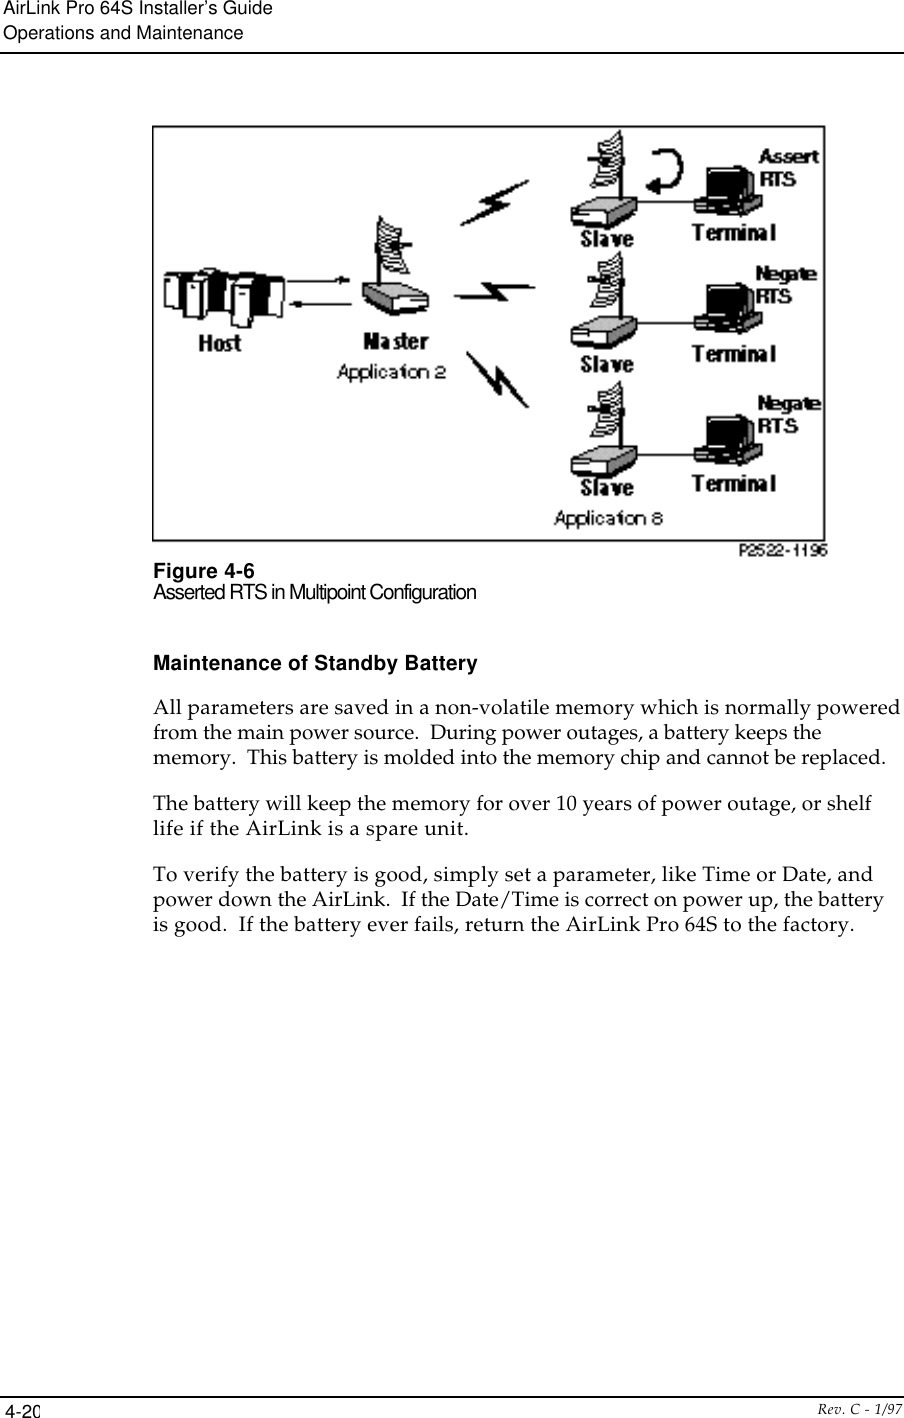 AirLink Pro 64S Installer’s GuideOperations and MaintenanceRev. C - 1/974-20Figure 4-6Asserted RTS in Multipoint ConfigurationMaintenance of Standby BatteryAll parameters are saved in a non-volatile memory which is normally poweredfrom the main power source.  During power outages, a battery keeps thememory.  This battery is molded into the memory chip and cannot be replaced.The battery will keep the memory for over 10 years of power outage, or shelflife if the AirLink is a spare unit.To verify the battery is good, simply set a parameter, like Time or Date, andpower down the AirLink.  If the Date/Time is correct on power up, the batteryis good.  If the battery ever fails, return the AirLink Pro 64S to the factory.